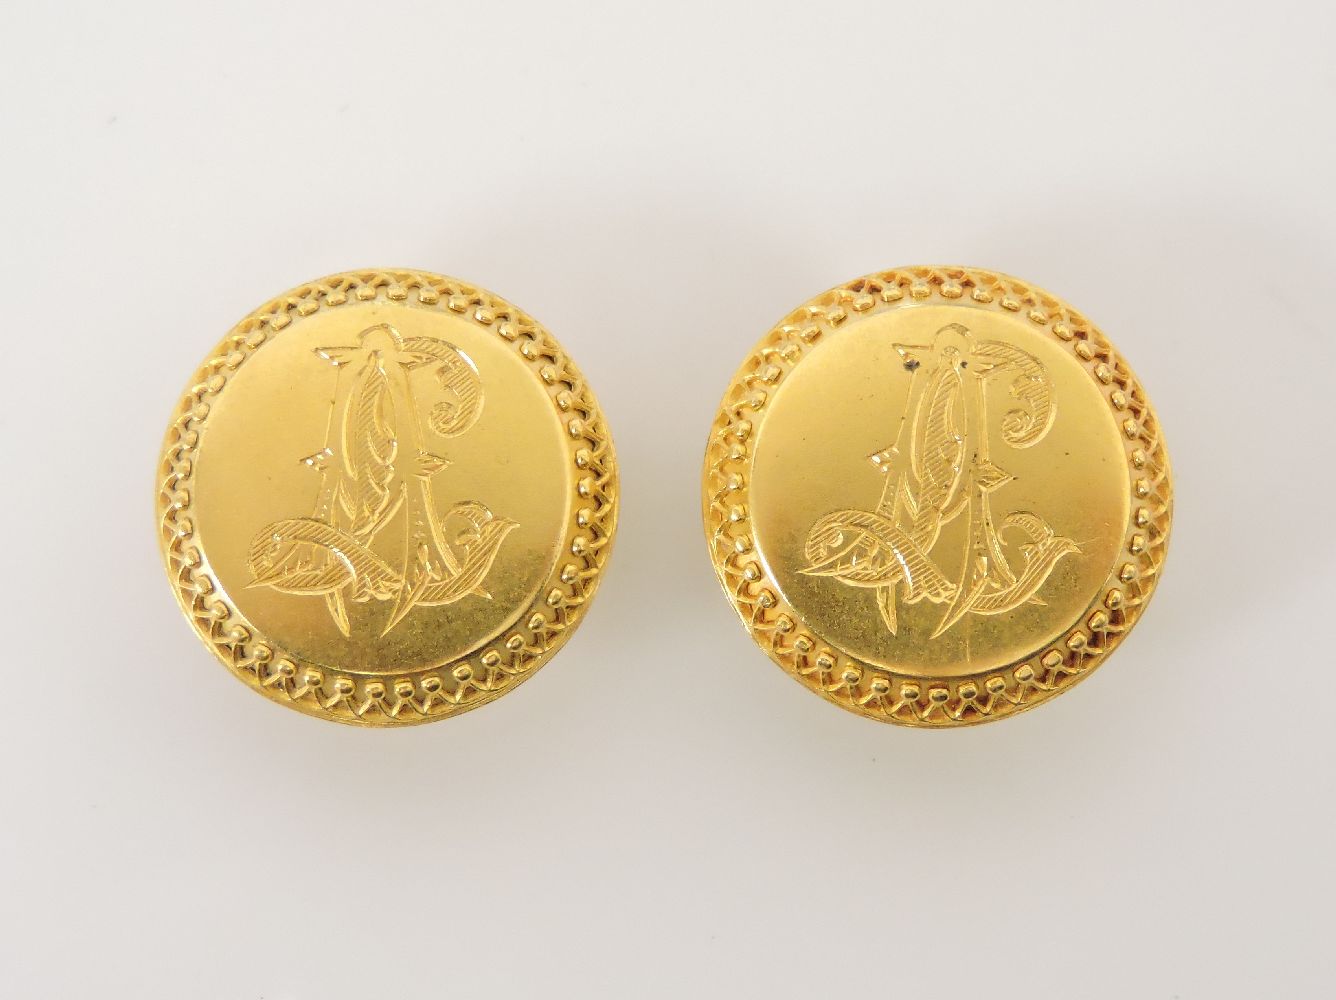 A pair of Victorian gold studs, with hand engraved monogram and raised decorative border, tested